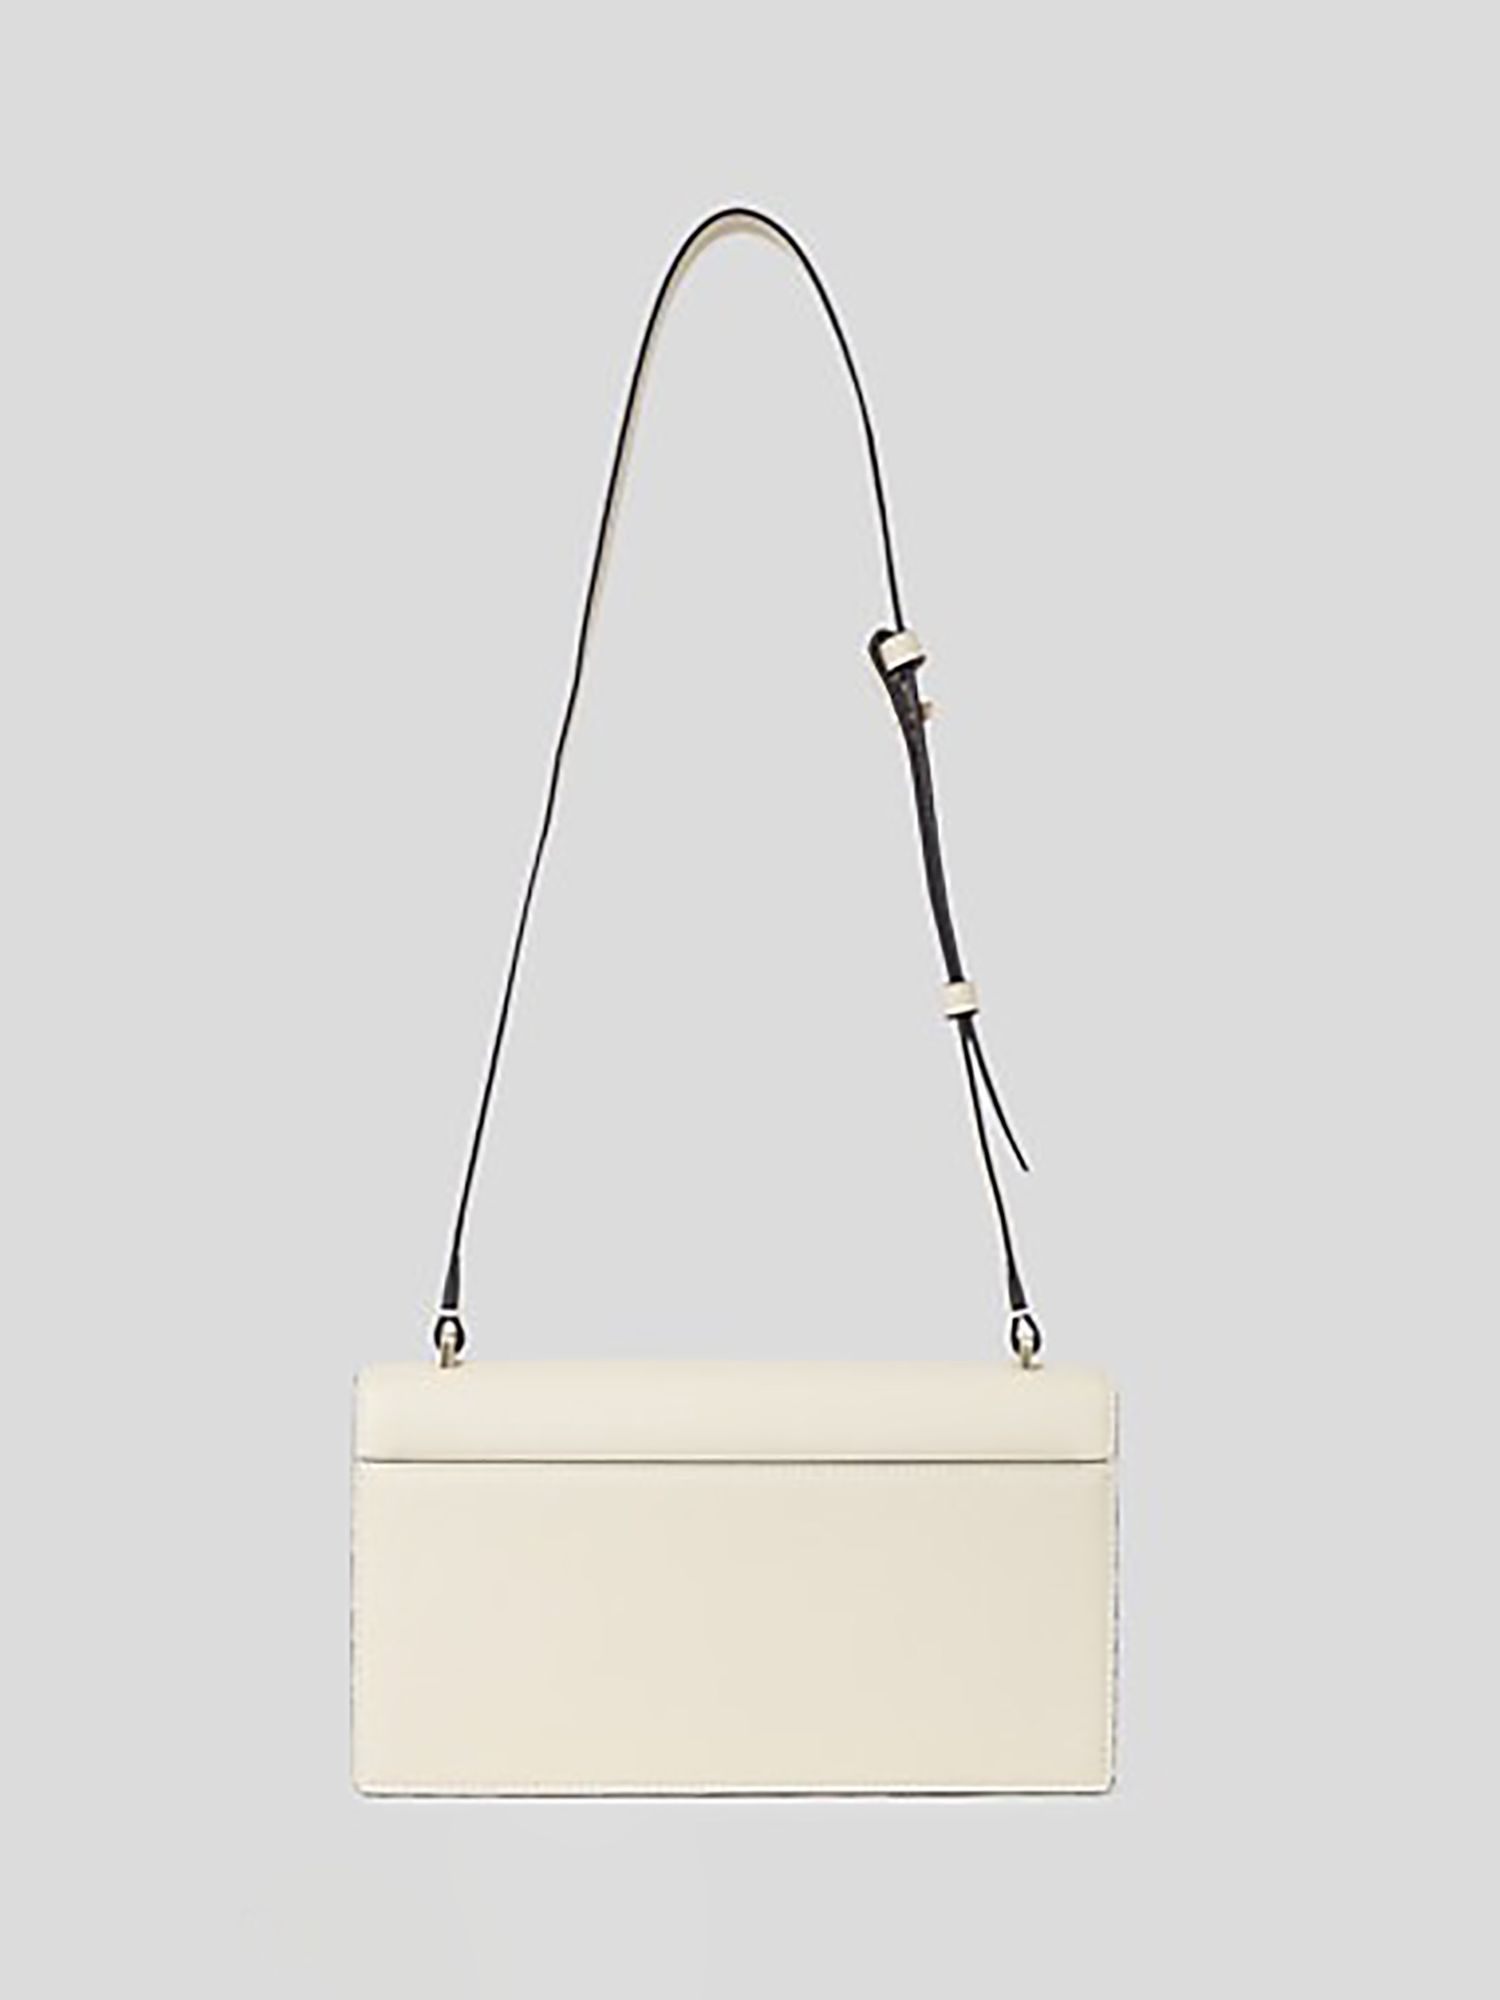 KARL LAGERFELD Rue St-Guillaume Elongated Shoulder Bag, Off White, One Size